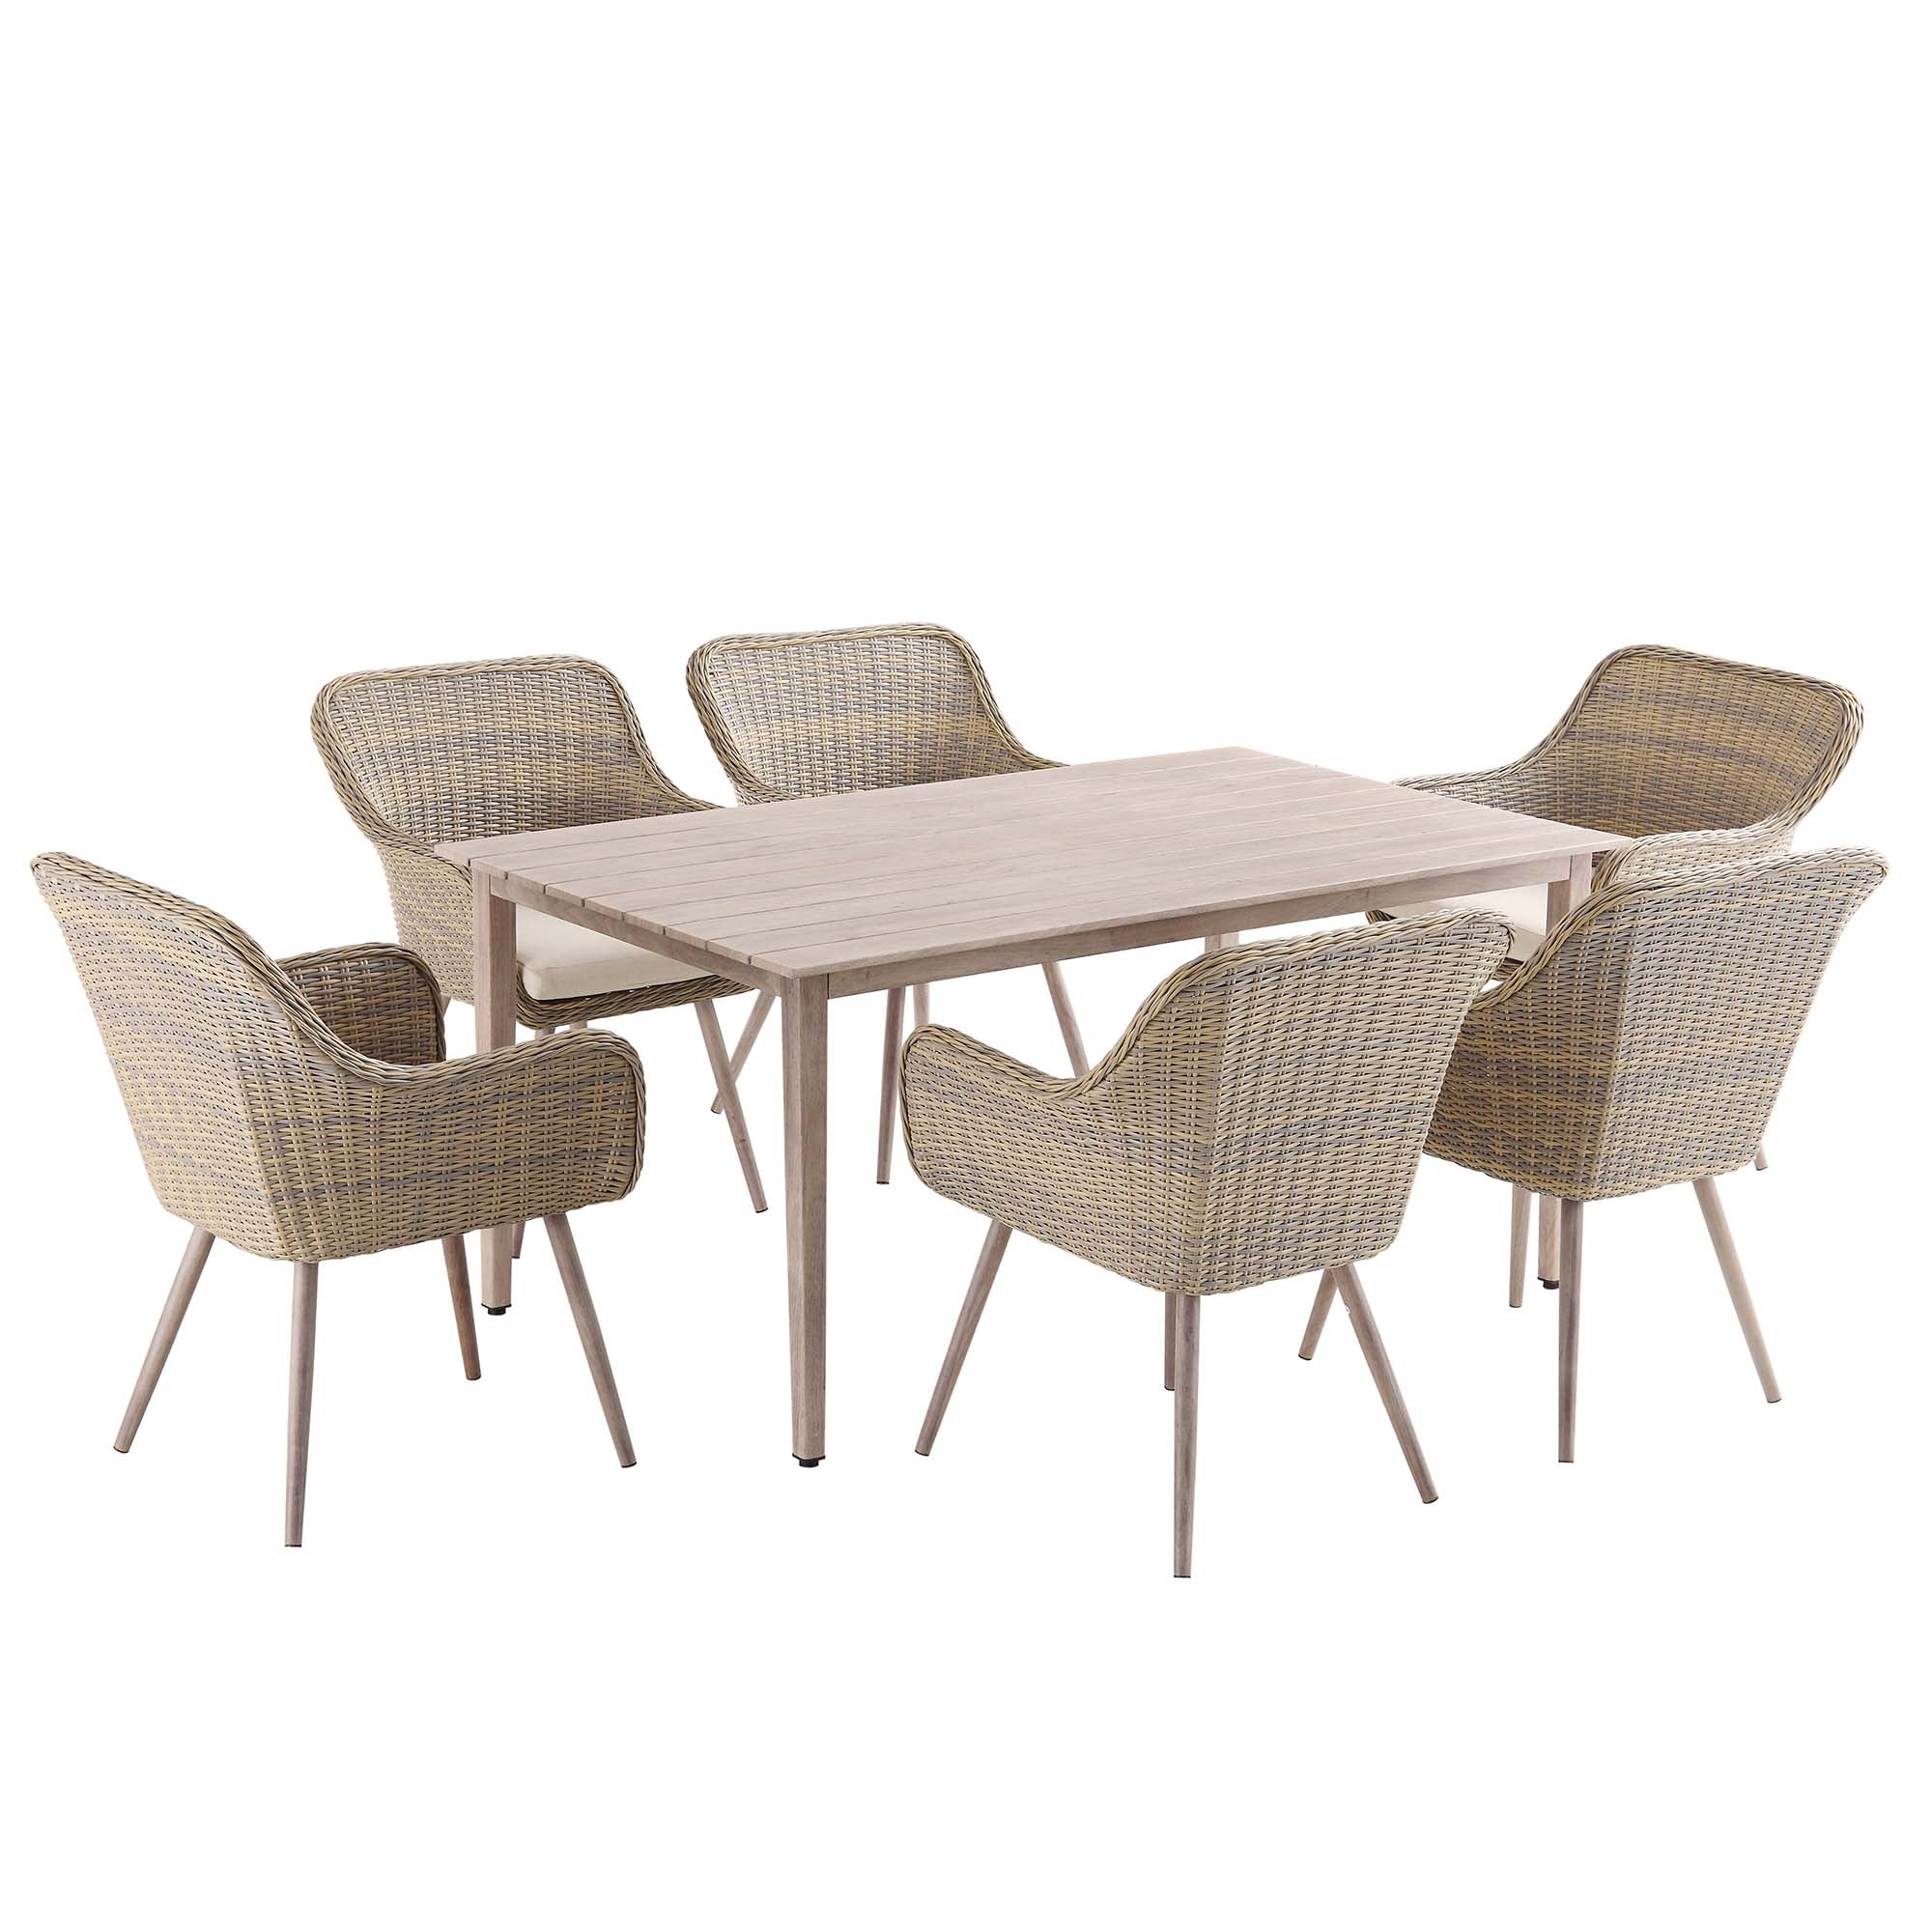 Cliveden Outdoor Aluminium Washed Wood Effect and Round Wicker Rattan 6-Seater Dining Set